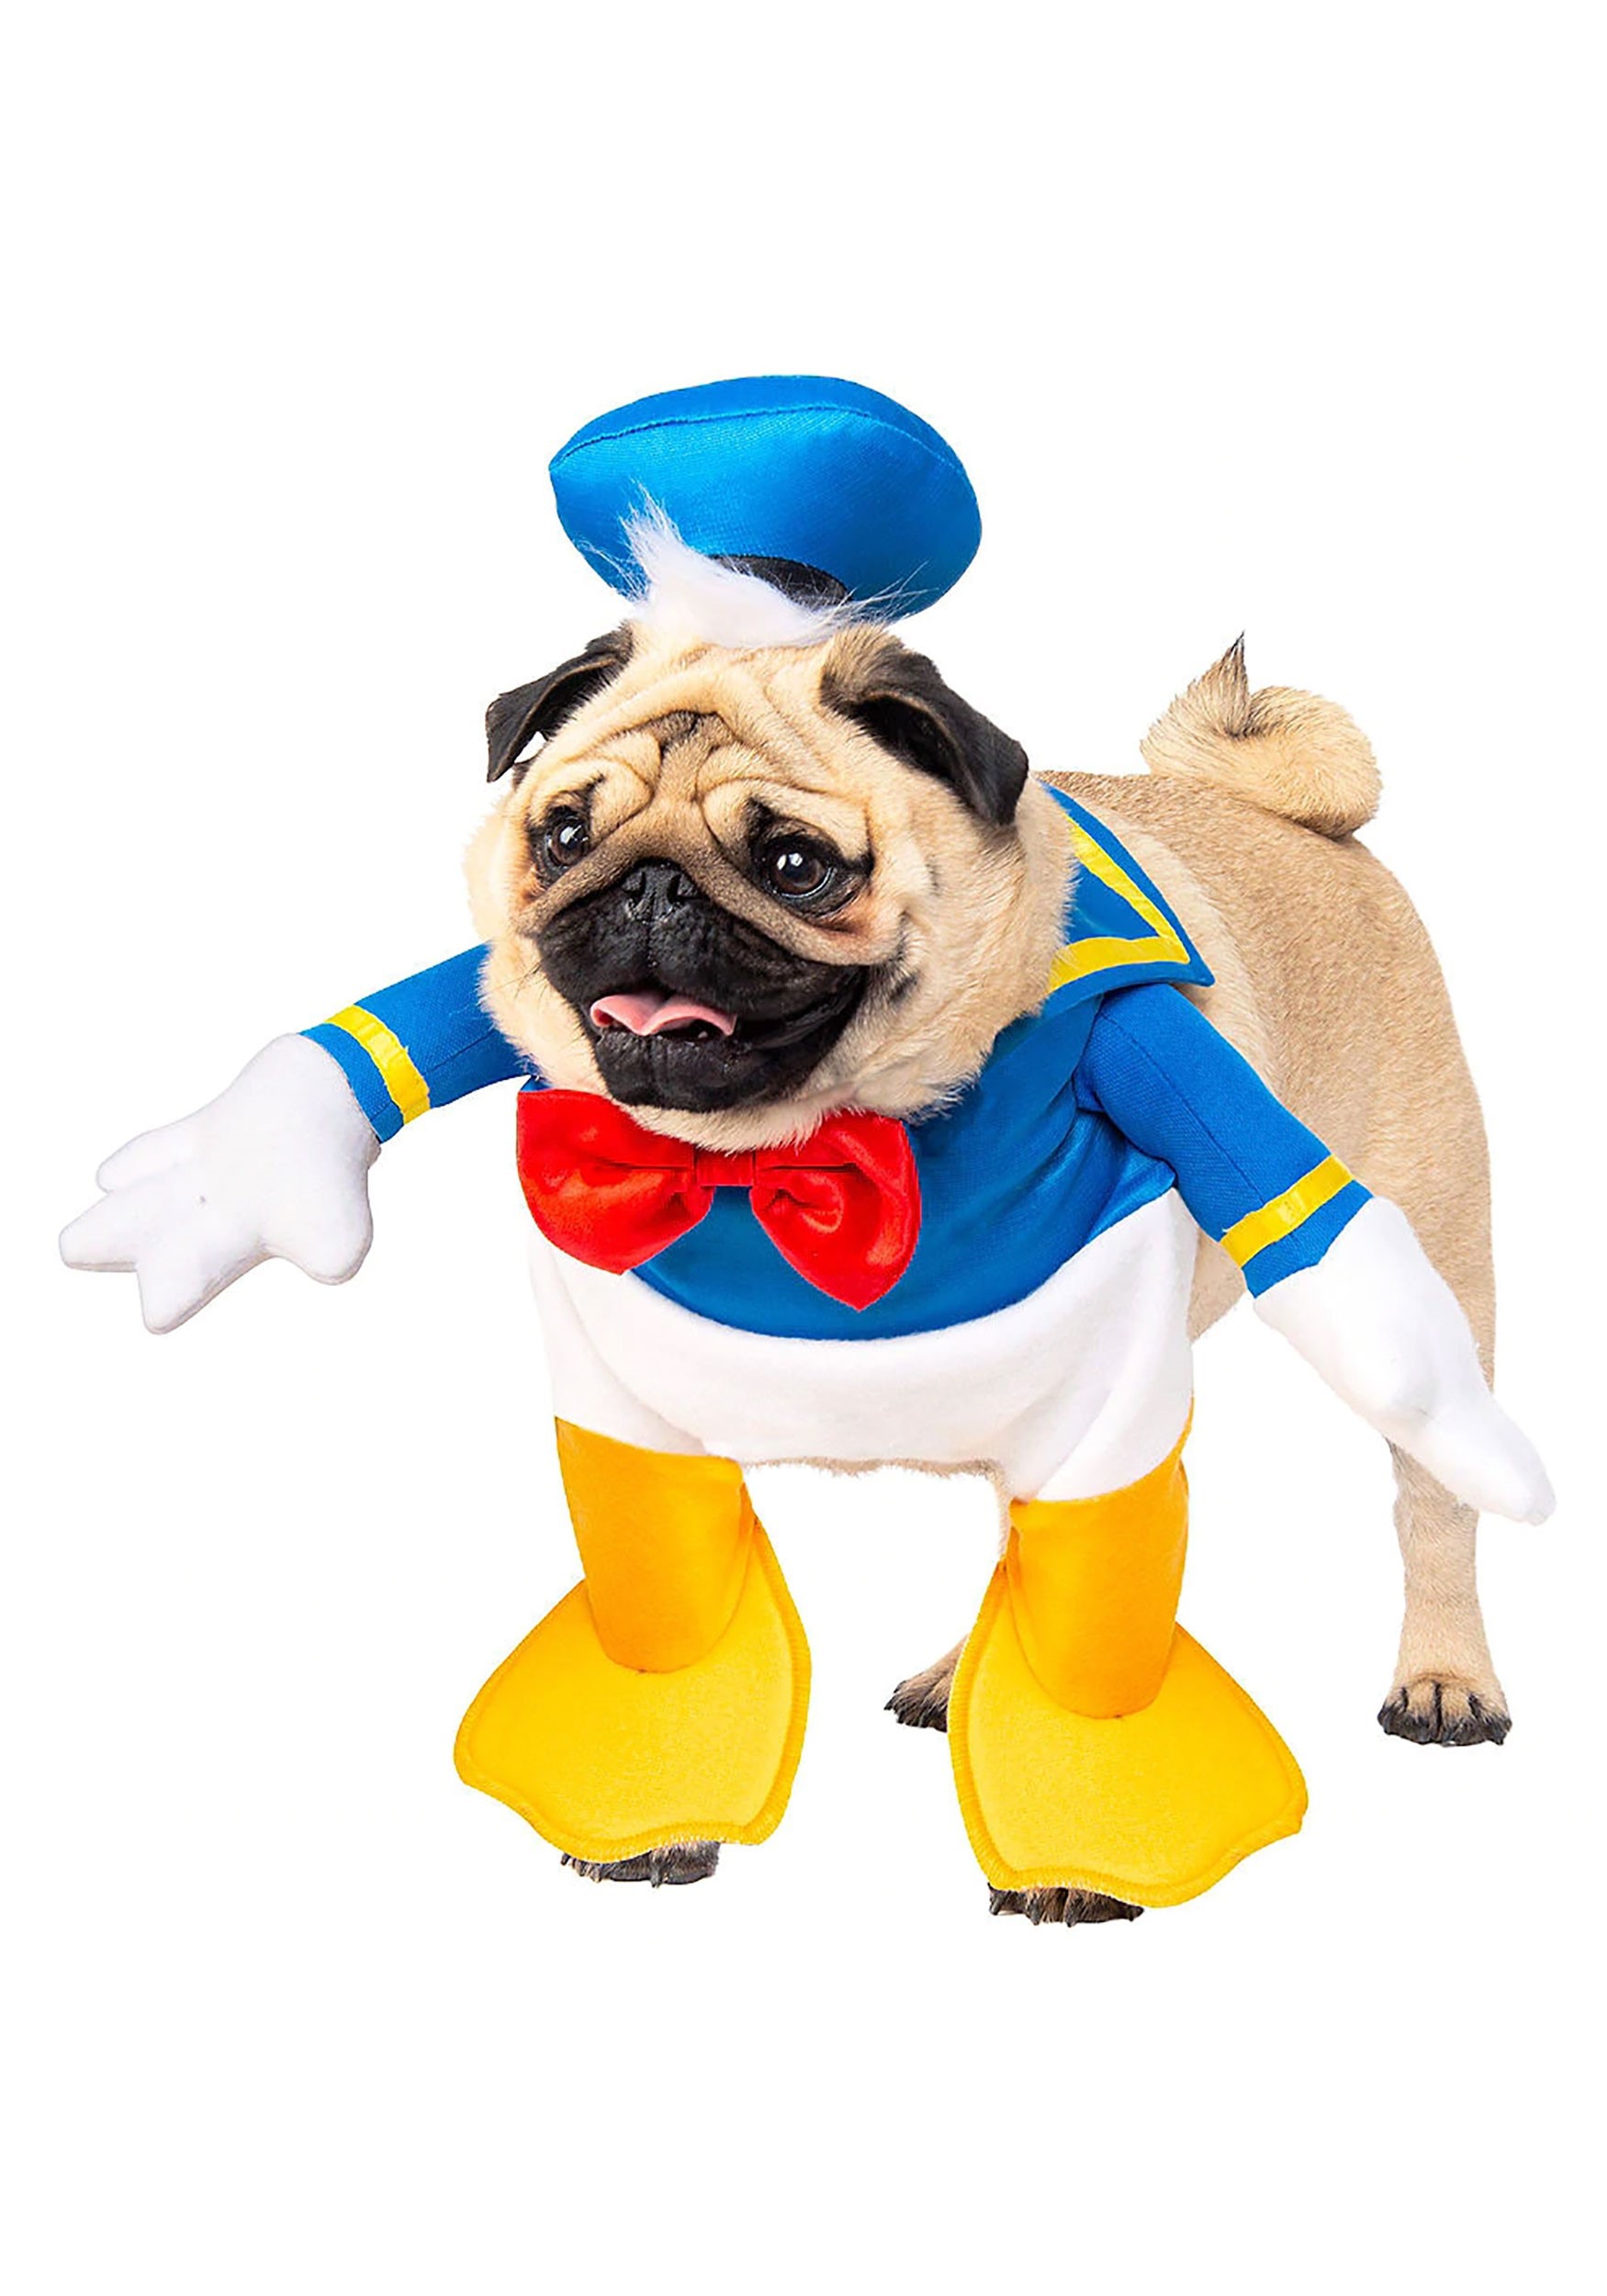 Photos - Fancy Dress Rubies Costume Co. Inc Donald Duck Costume for Dogs Blue/White/Yel 